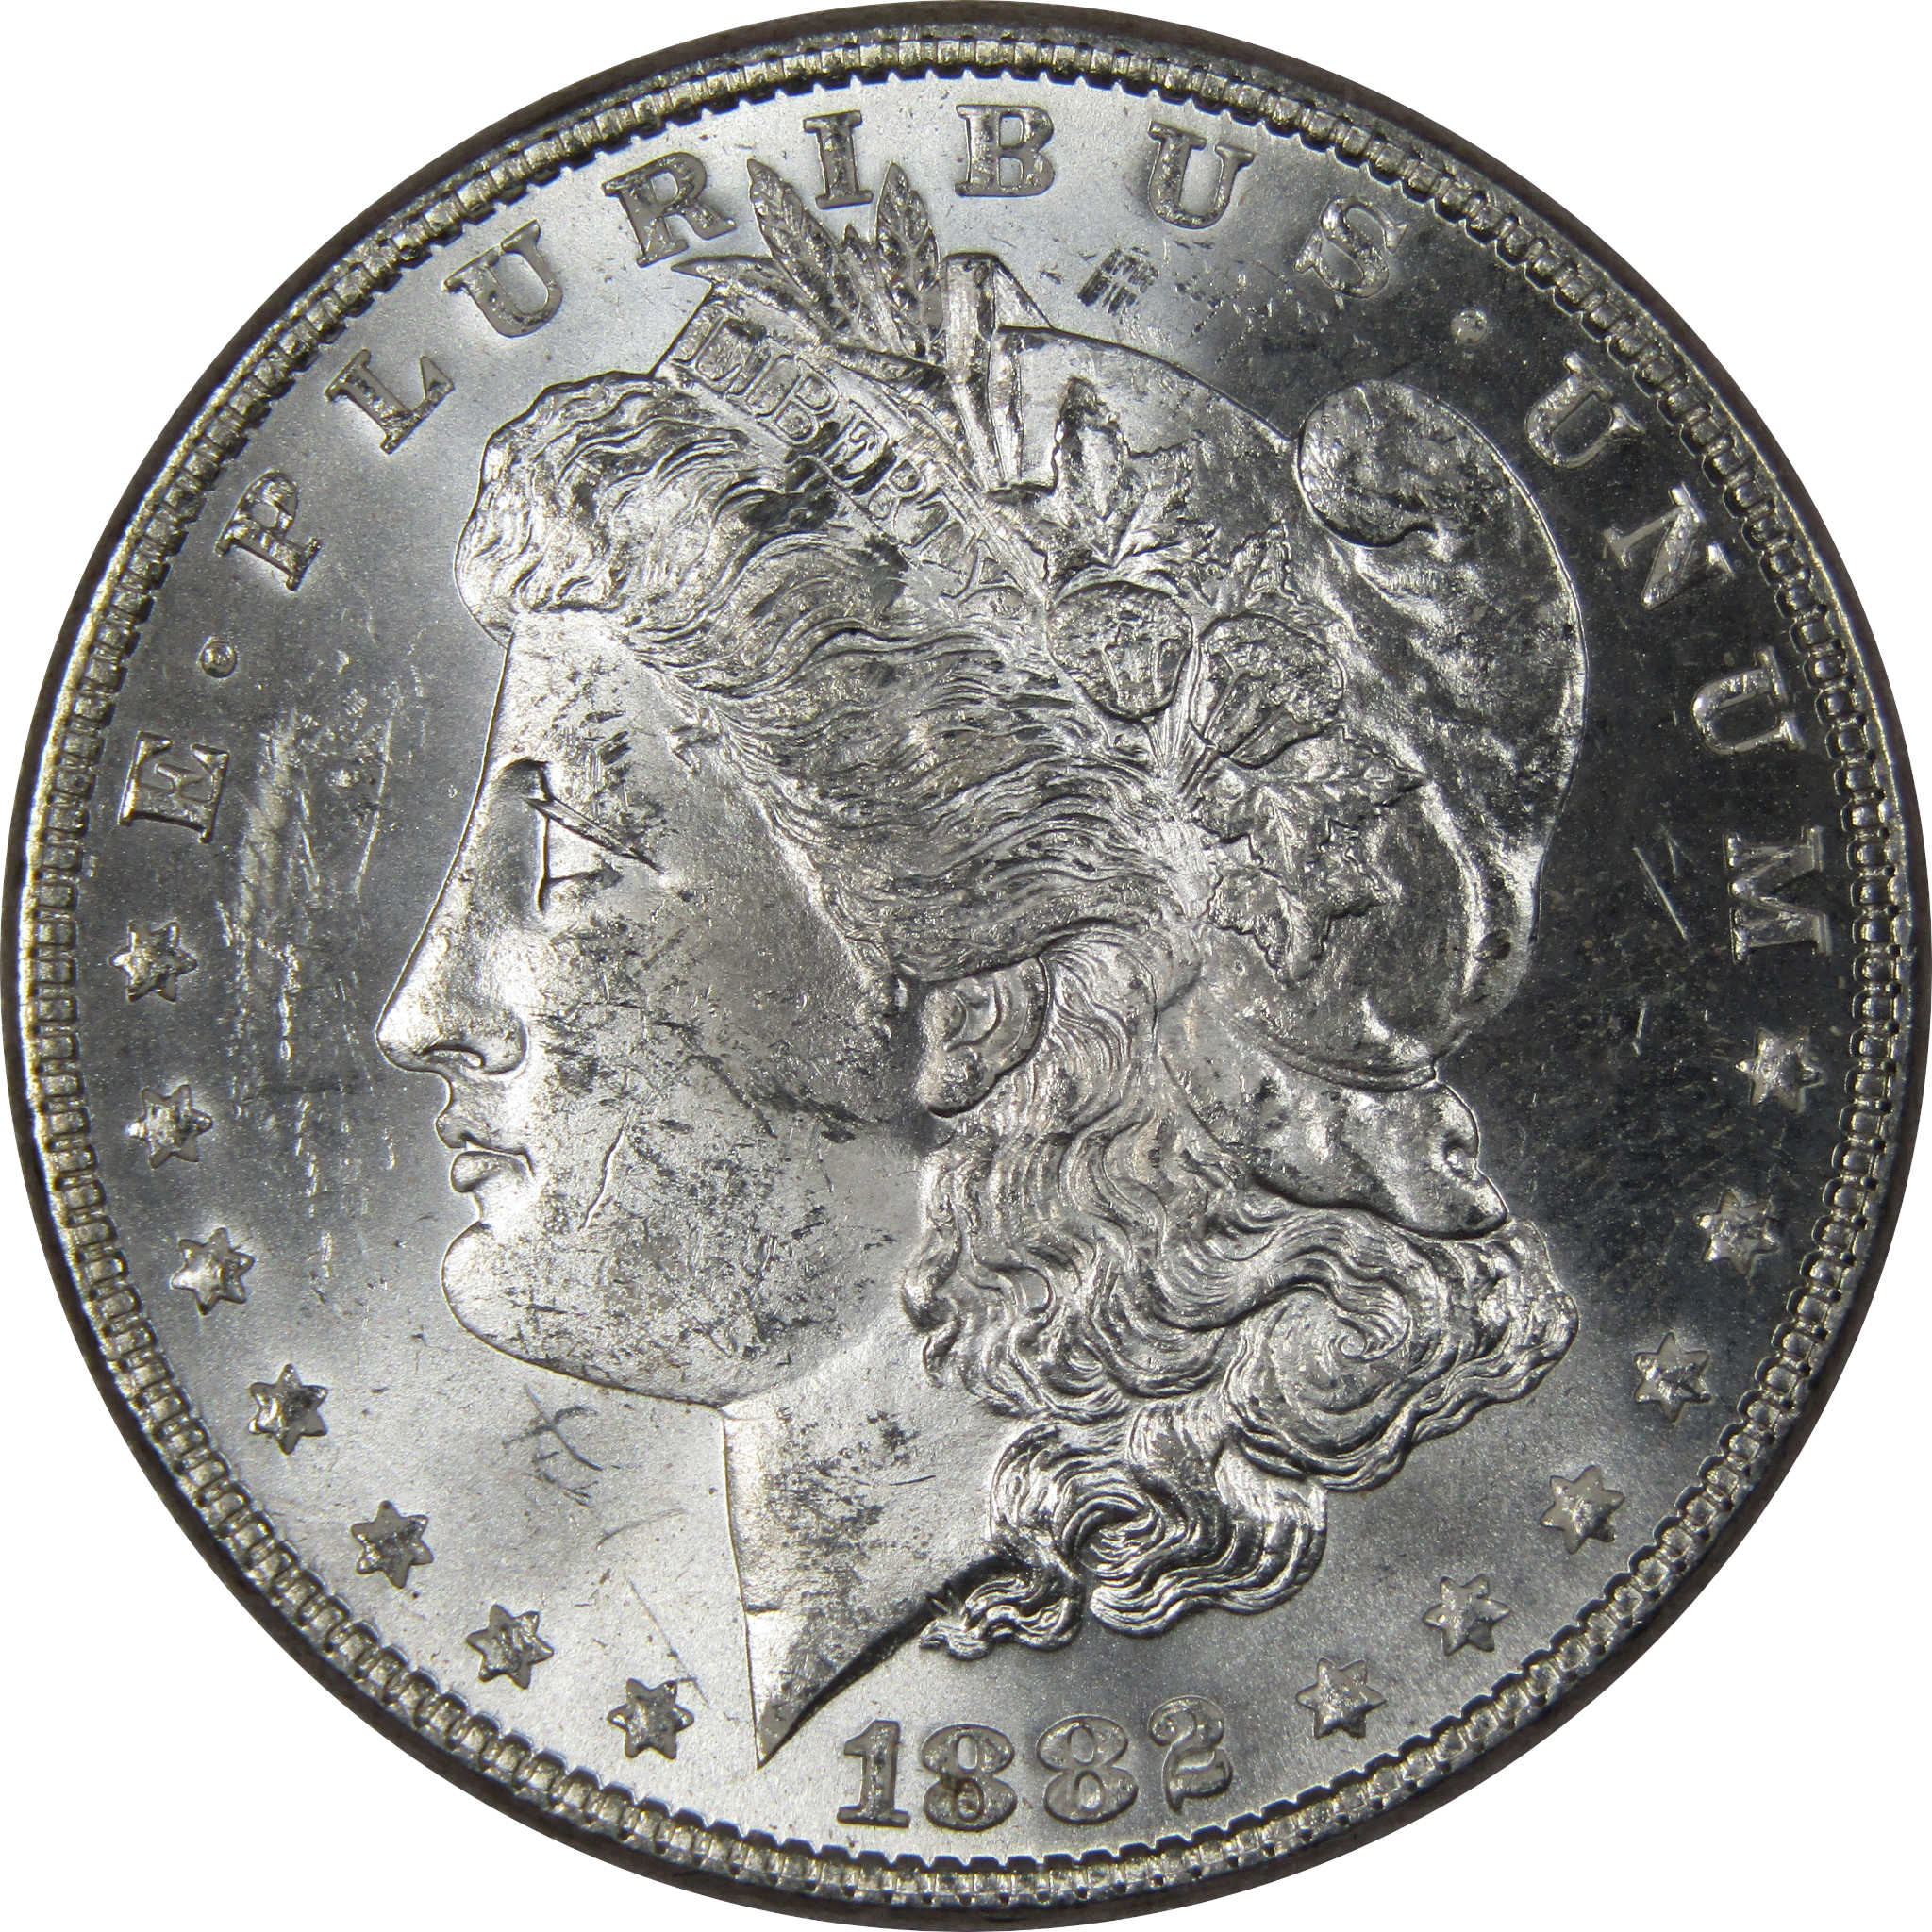 1882 Morgan Dollar BU Uncirculated Mint State 90% Silver SKU:IPC9692 - Morgan coin - Morgan silver dollar - Morgan silver dollar for sale - Profile Coins &amp; Collectibles